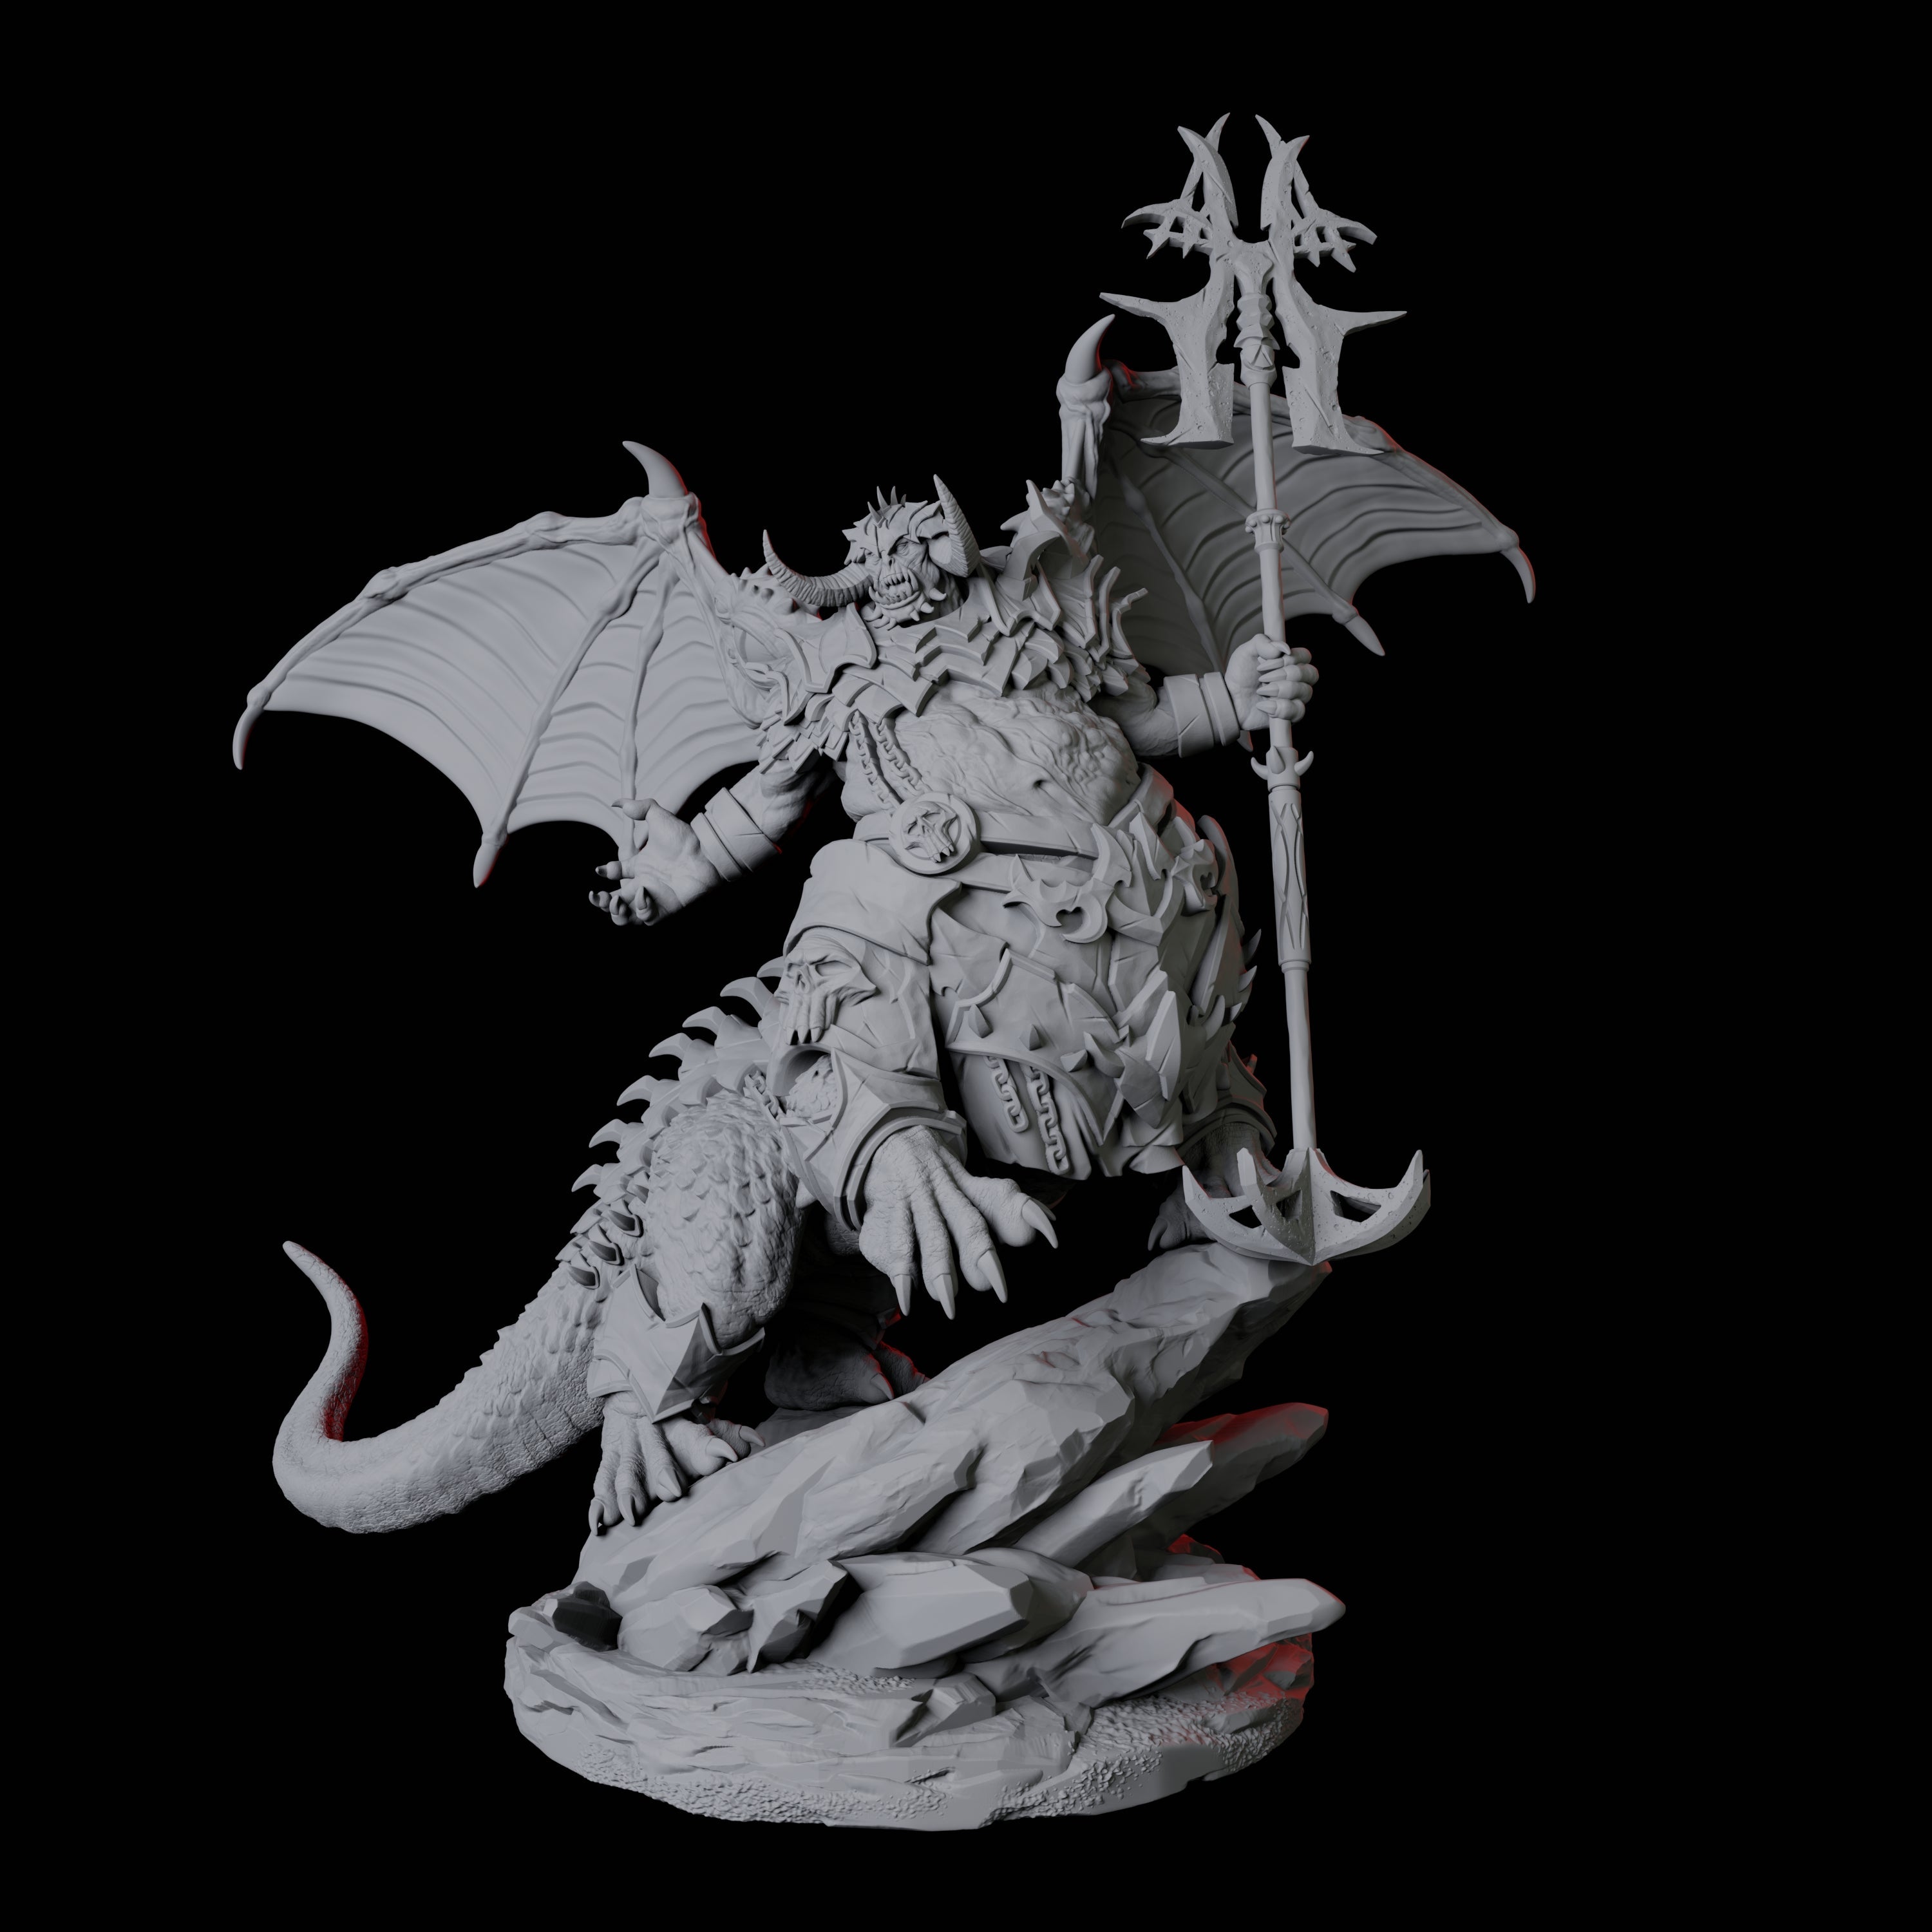 Four Attacking Vavakia Miniature for Dungeons and Dragons, Pathfinder or other TTRPGs